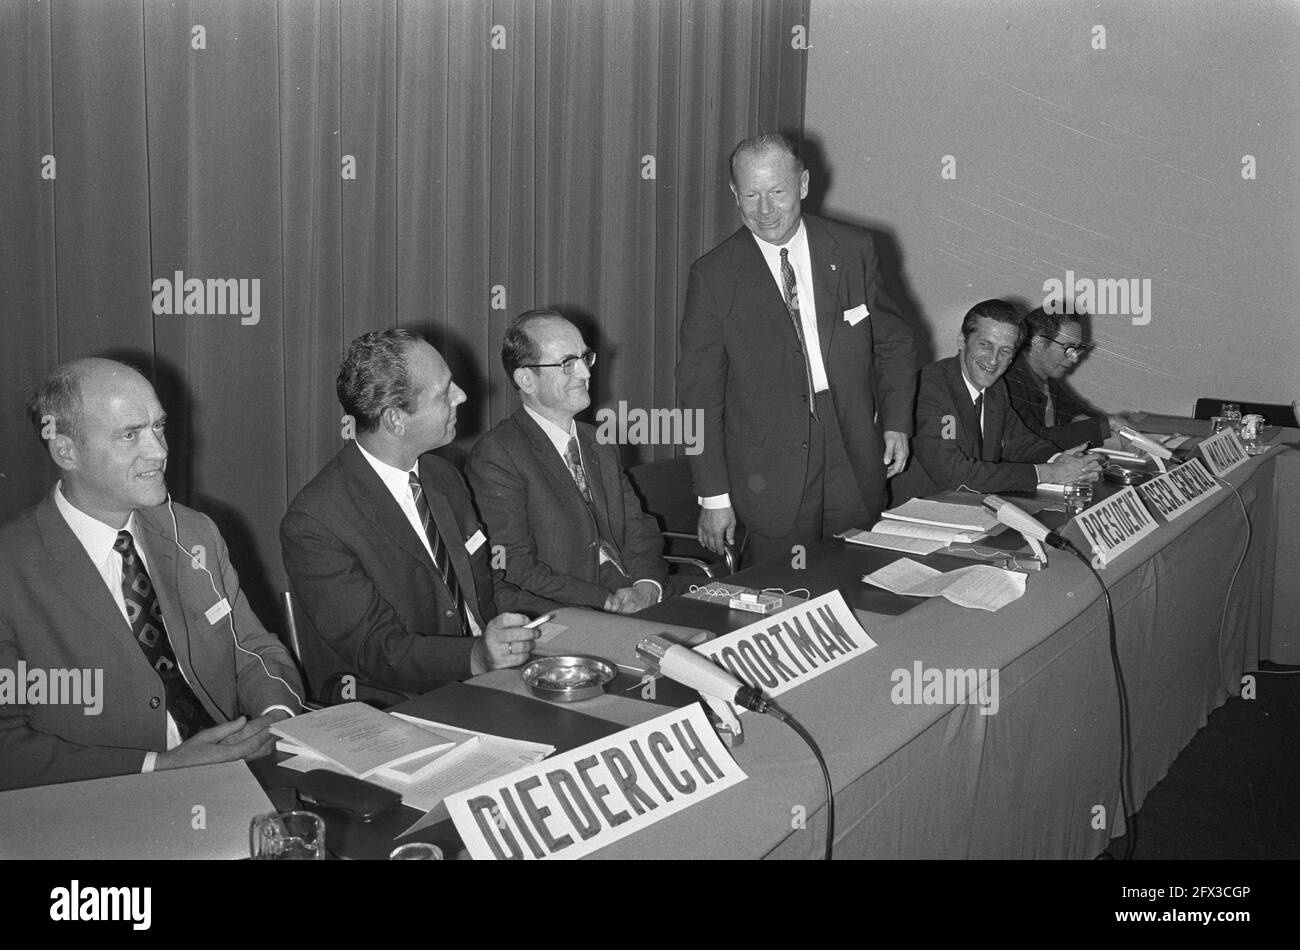 Dutch: Minister Drees (Transport and Public Works) opens Scientific Symposium in Congresgebouw, The Hague, from left to right Diederich, Noortman, Drees, Ridley, Vrebos,  openings, The Netherlands, 20th century press agency photo, news to remember, documentary, historic photography 1945-1990, visual stories, human history of the Twentieth Century, capturing moments in time Stock Photo